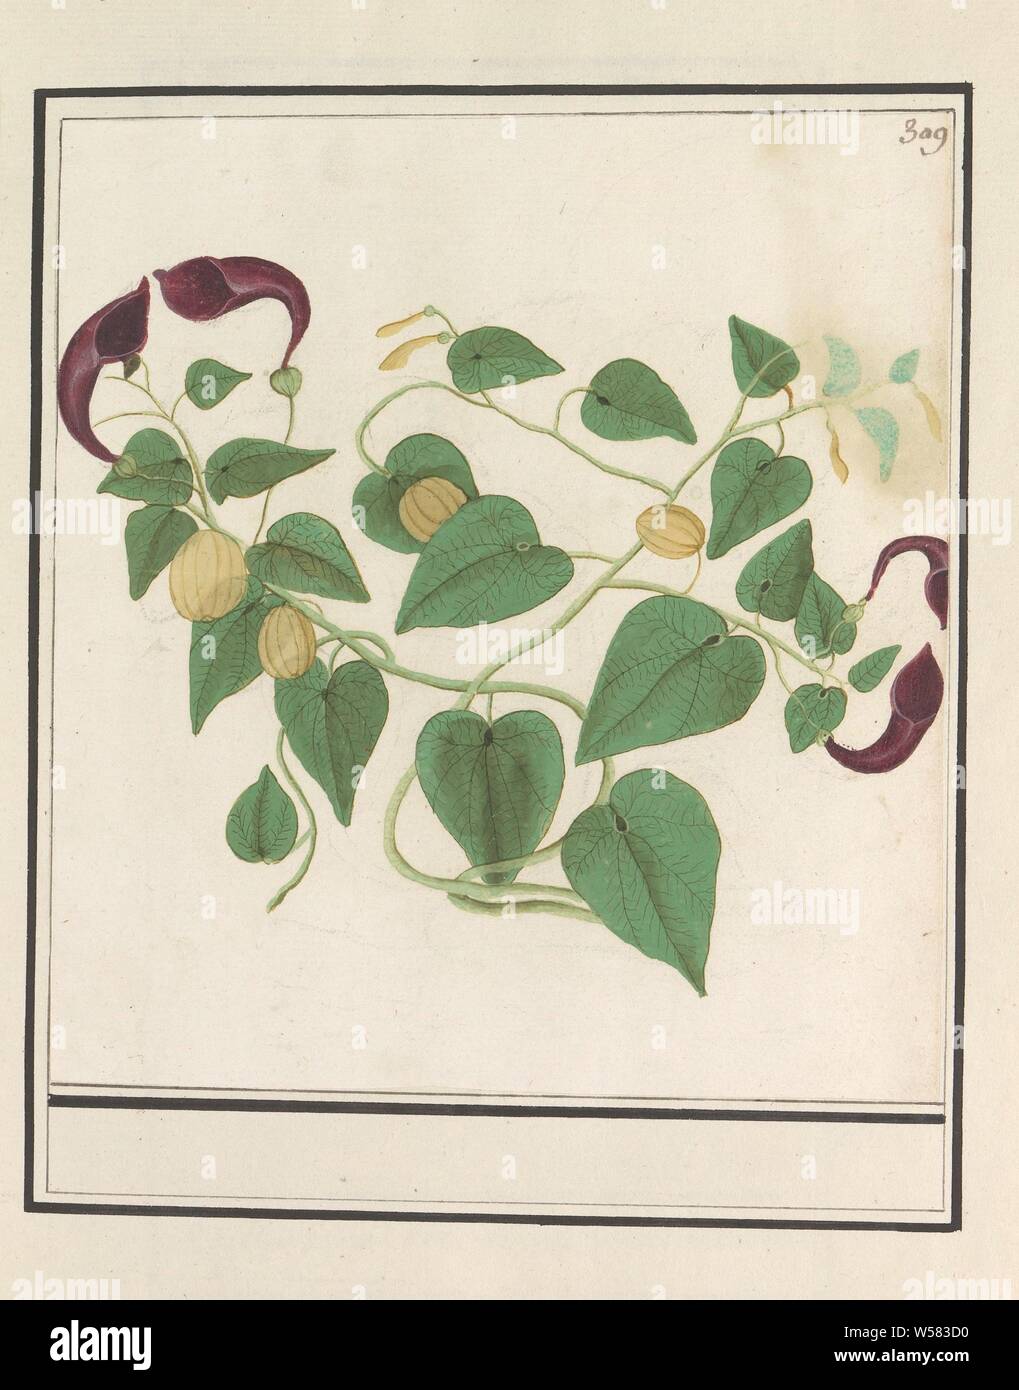 Unknown plant, possibly a plant from the Arum family. Numbered top right: 309. Part of the fourth album with drawings of flowers and mushrooms. Eleventh of twelve albums with drawings of animals, birds and plants known around 1600, commissioned by Emperor Rudolf II. With explanation in Dutch, Latin and French, flowers, Anselmus Boetius de Boodt, 1596 - 1610, paper, watercolor (paint), deck paint, chalk, brush, h 210 mm × w 190 mm Stock Photo